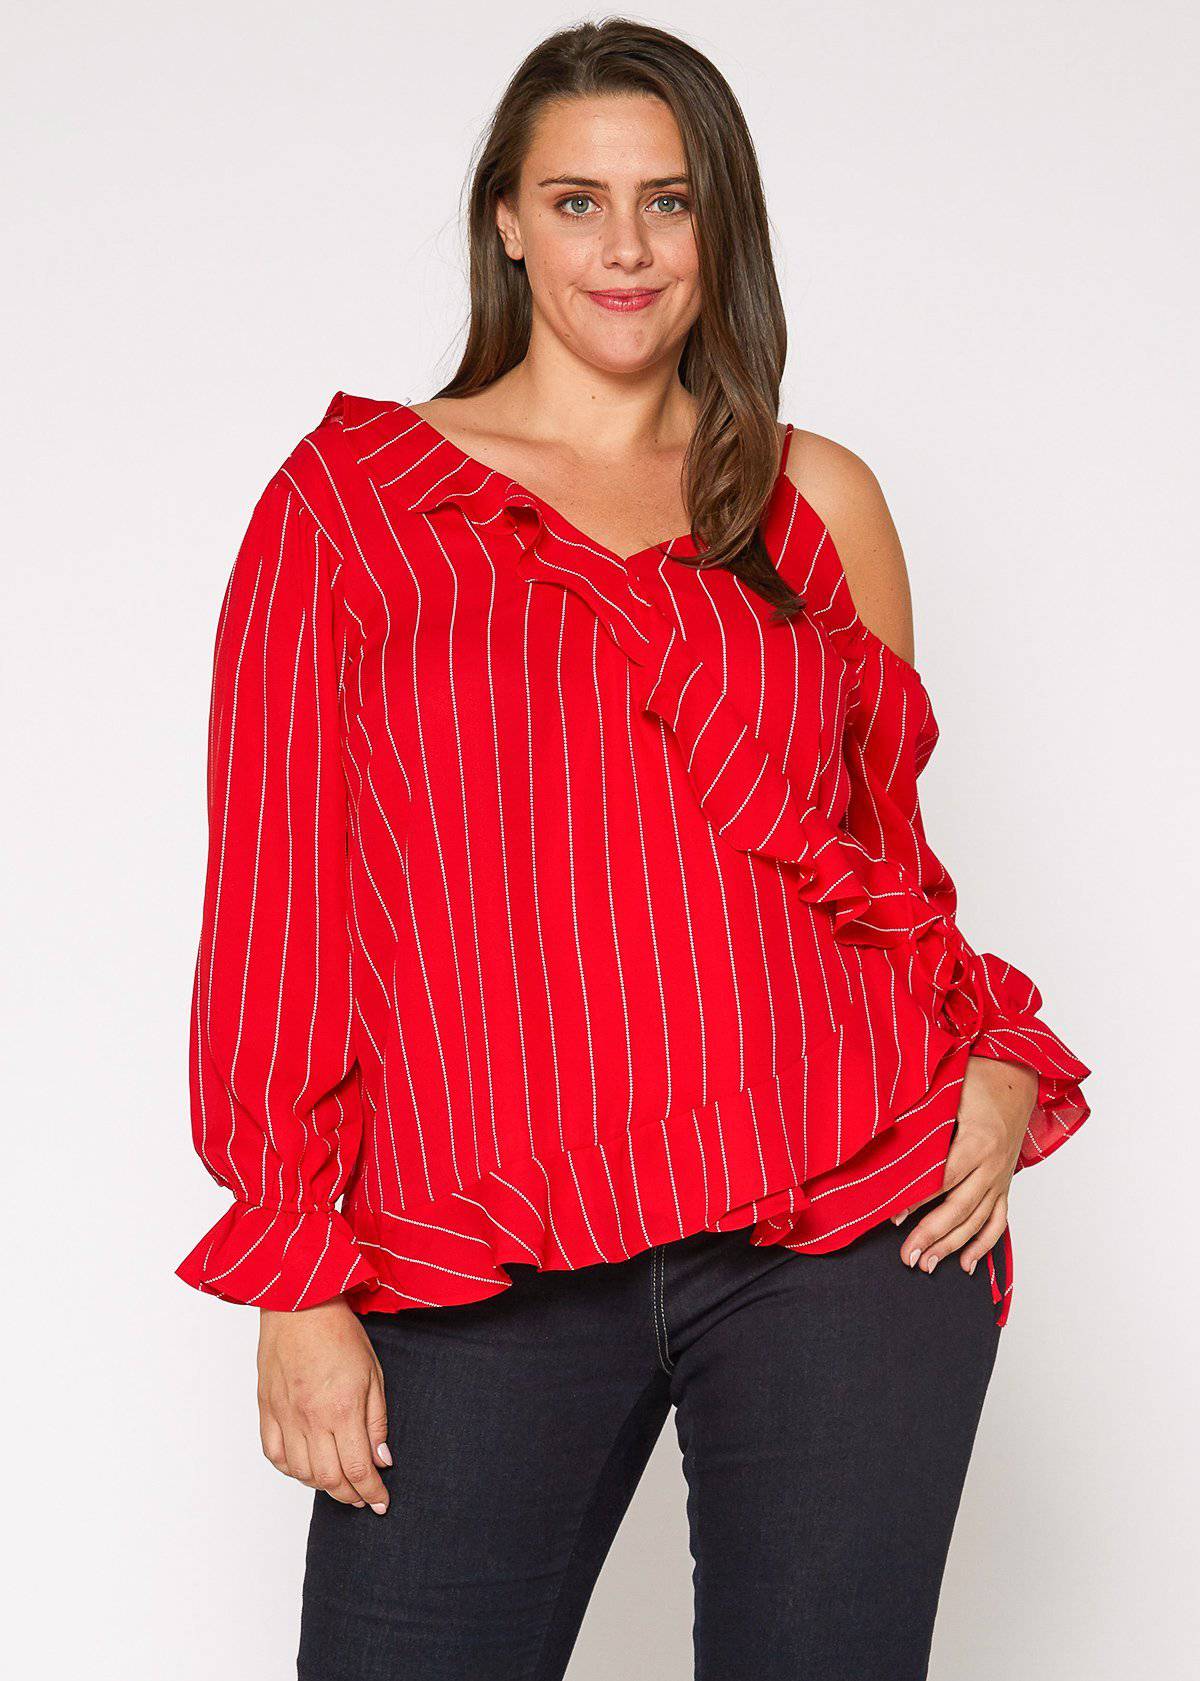 Plus Size Asymmetrical Shoulder Ruffle Blouse in Red by Shop at Konus